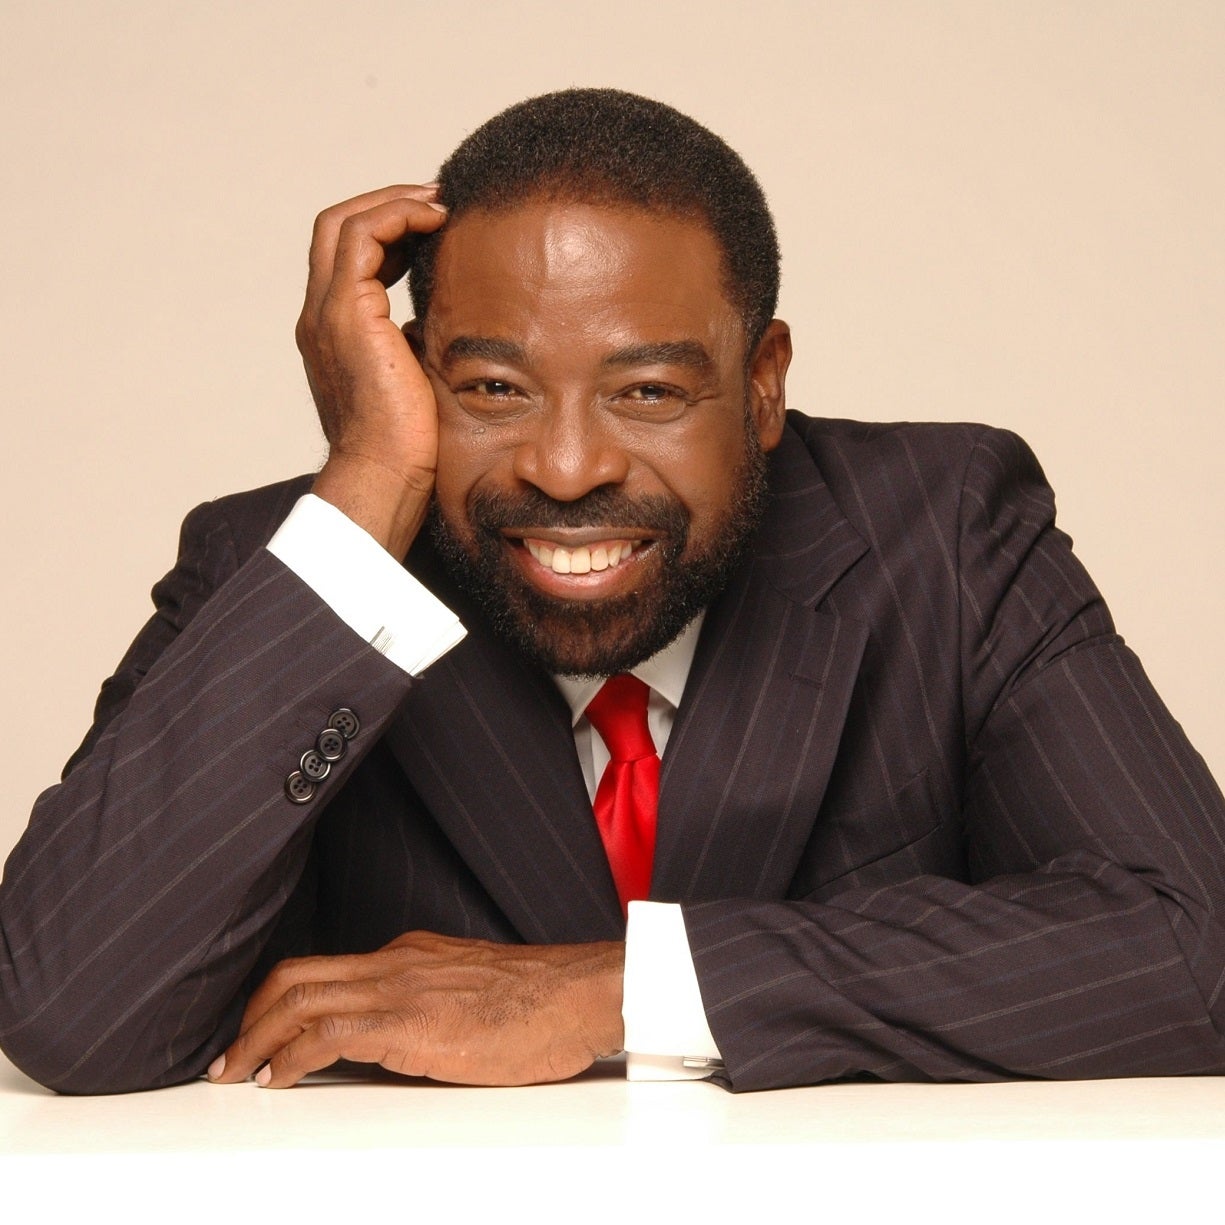 The 76-year old son of father (?) and mother(?) Les Brown in 2022 photo. Les Brown earned a  million dollar salary - leaving the net worth at  million in 2022